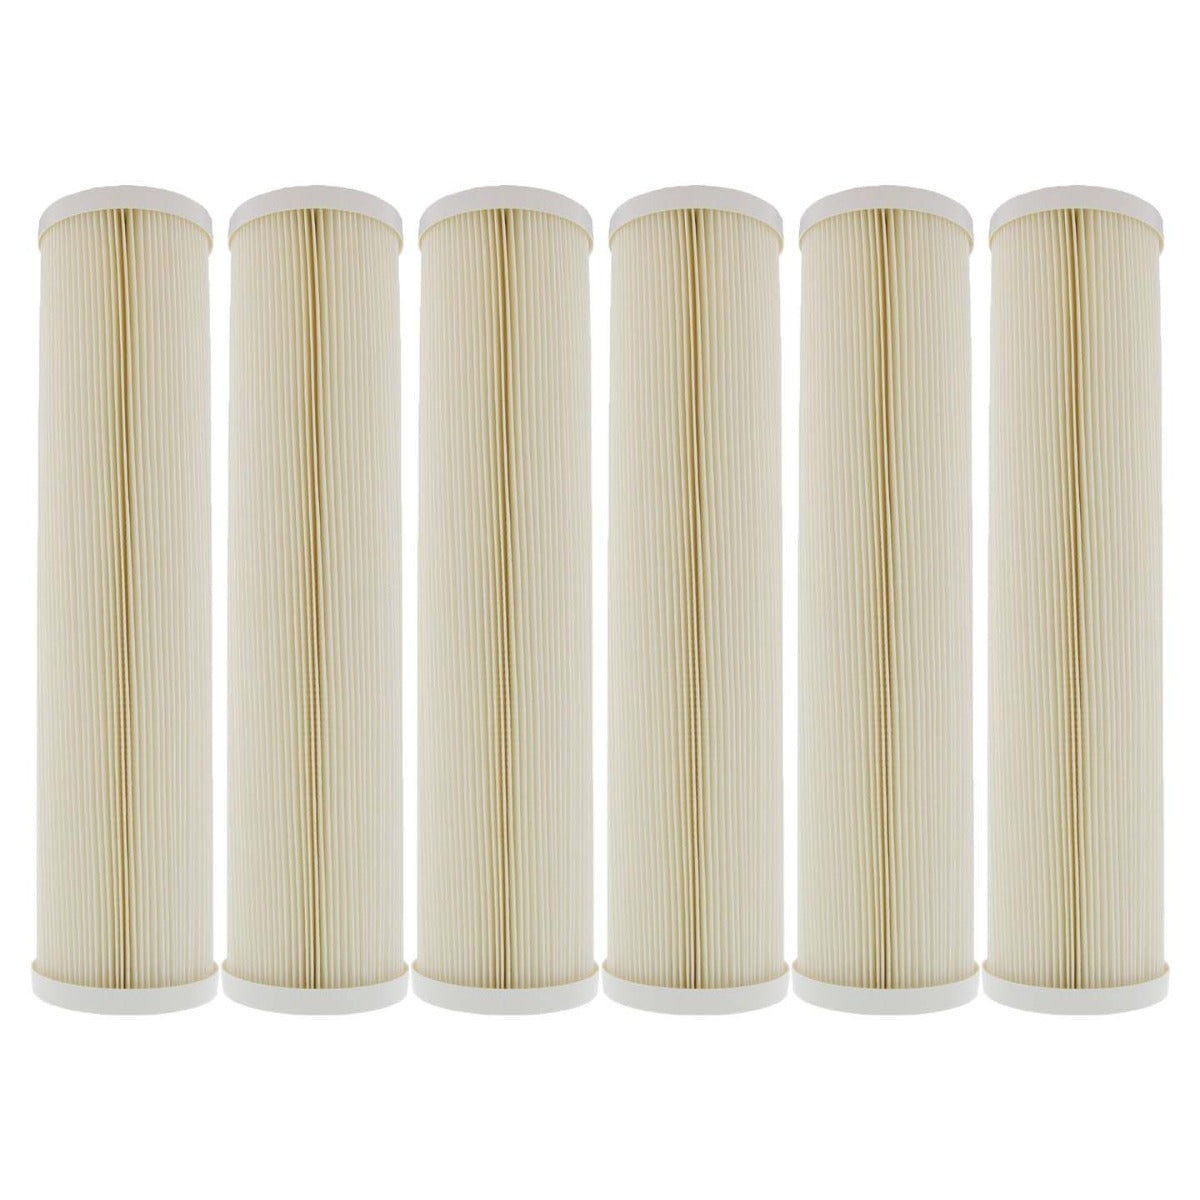 Pentek ECP5-20BB Pleated Sediment Water Filters (20-inch x 4-1/2-inch)